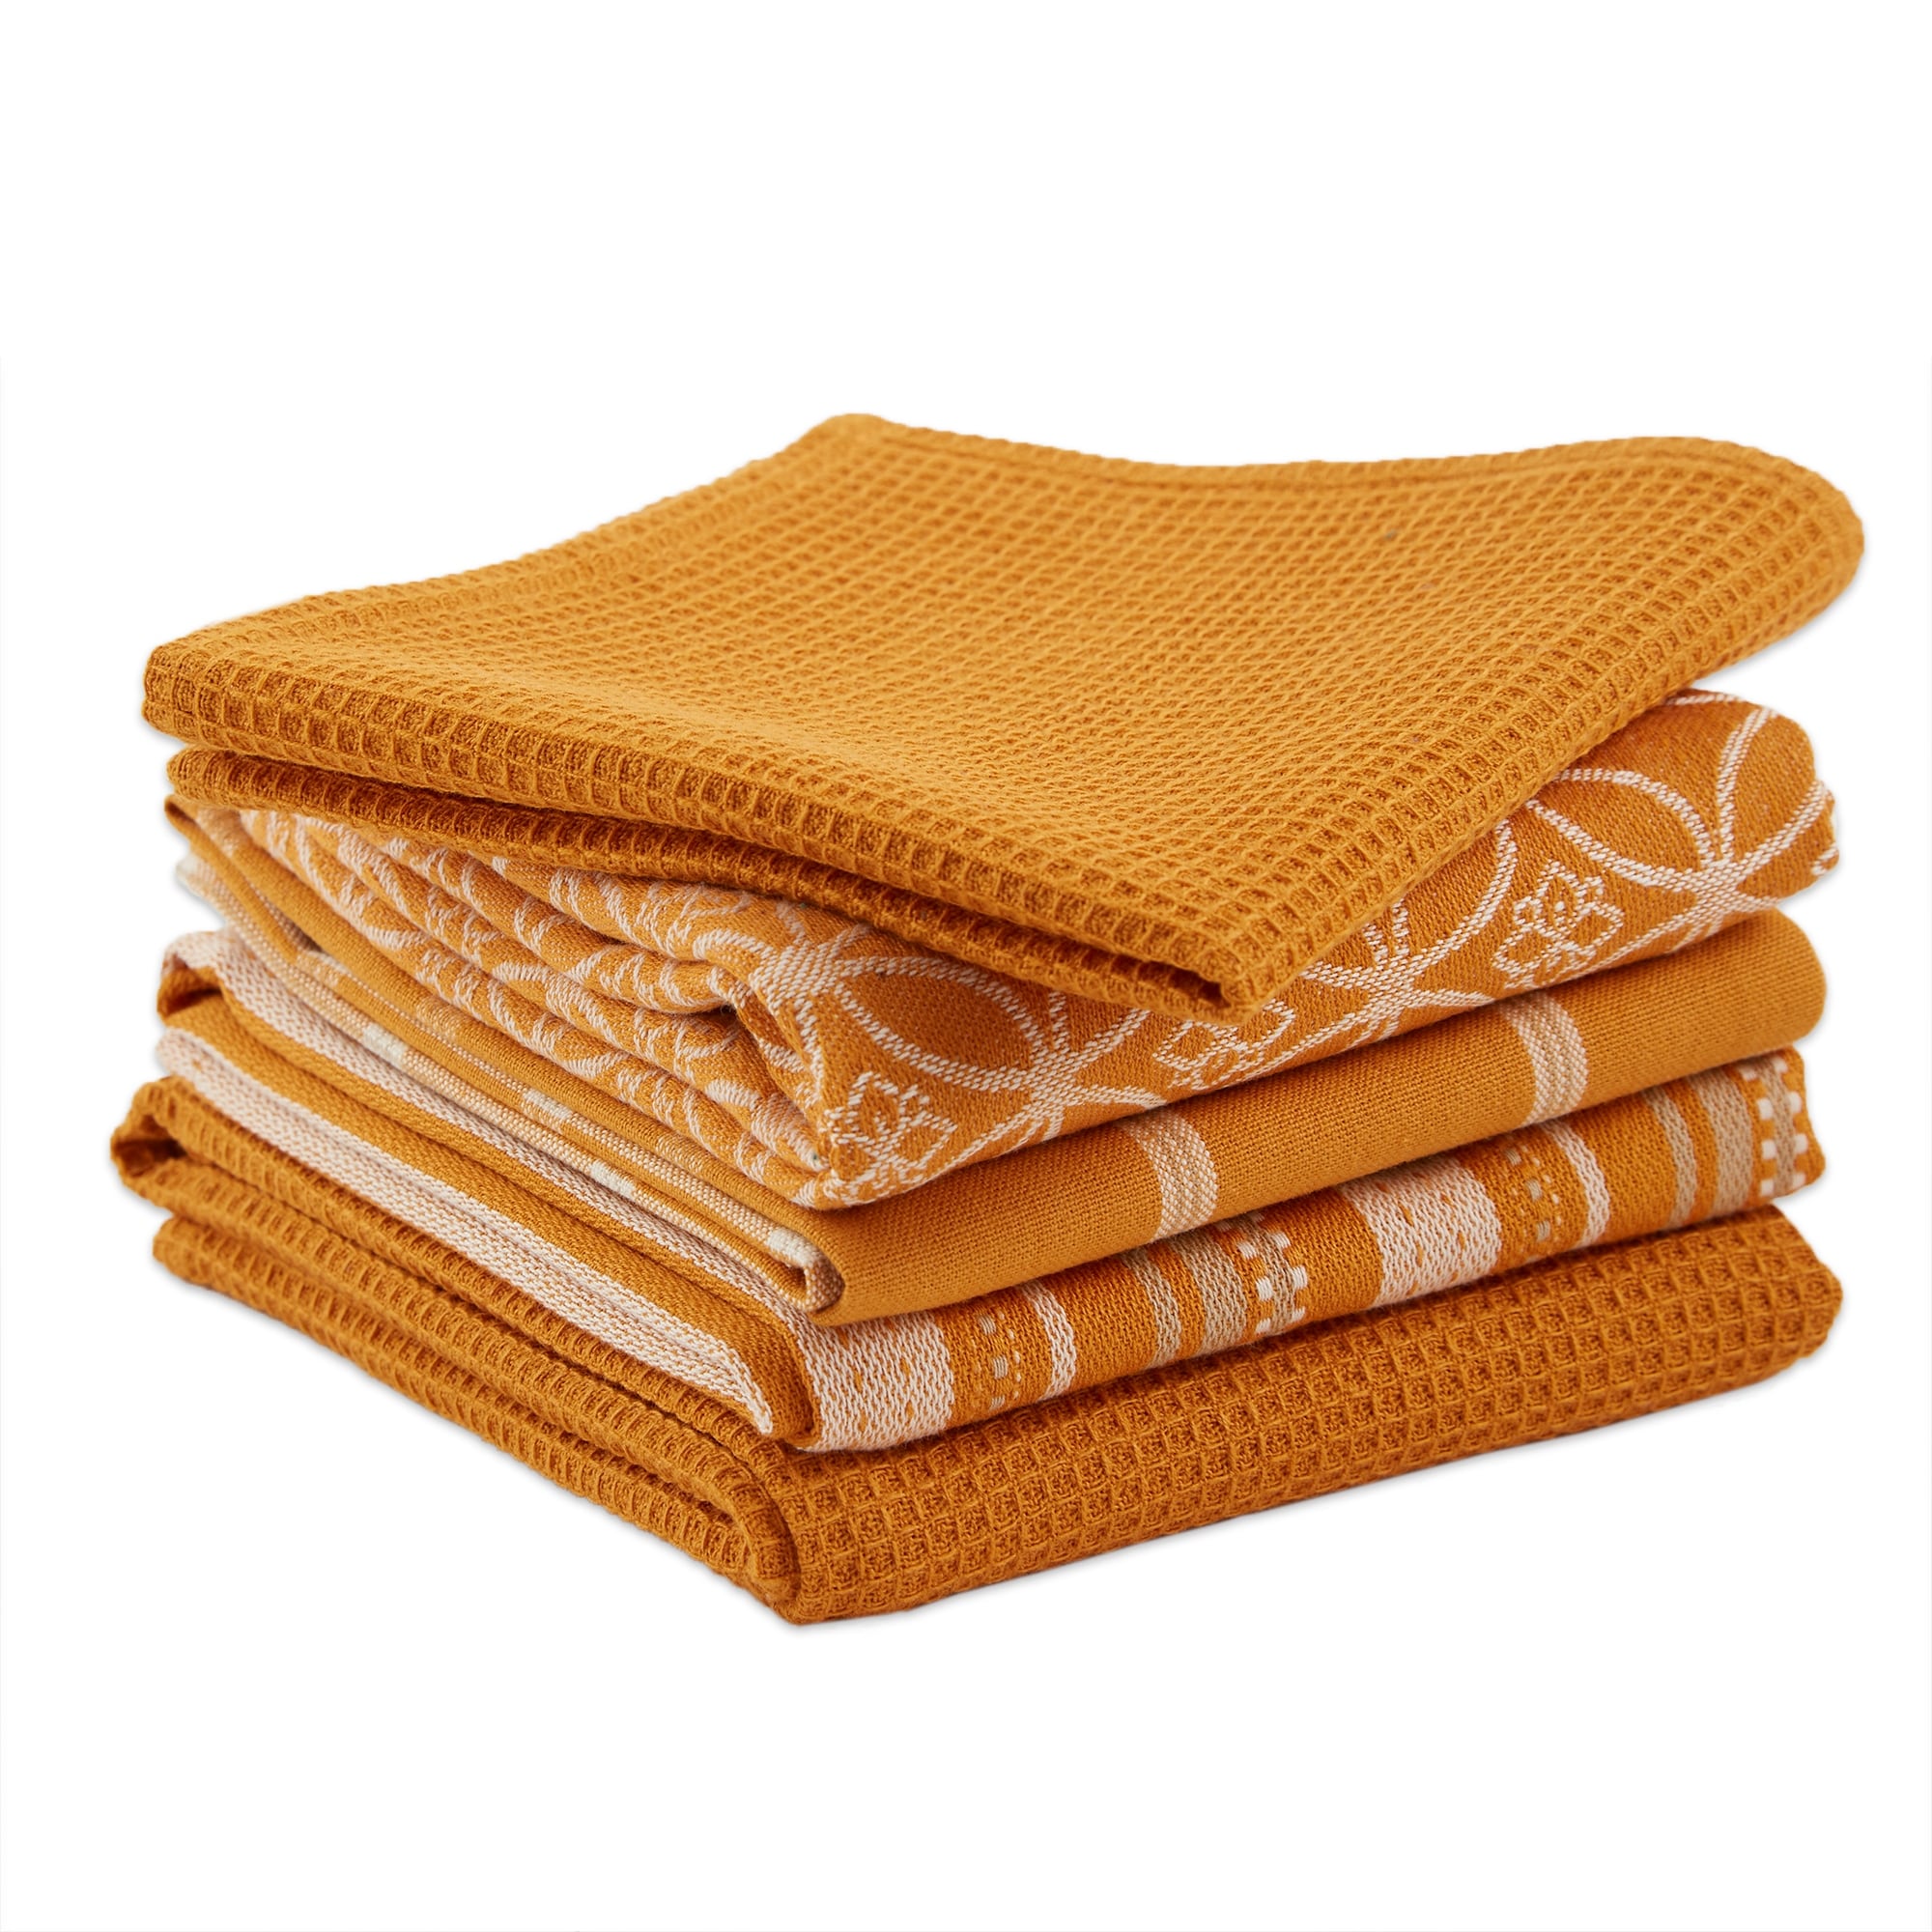 https://ak1.ostkcdn.com/images/products/is/images/direct/0f48968afd00e0014c835bf01922c8170253c90f/DII-Assorted-Kitchen-Dishtowel-%26-Dishcloths-%28Set-of-5%29.jpg